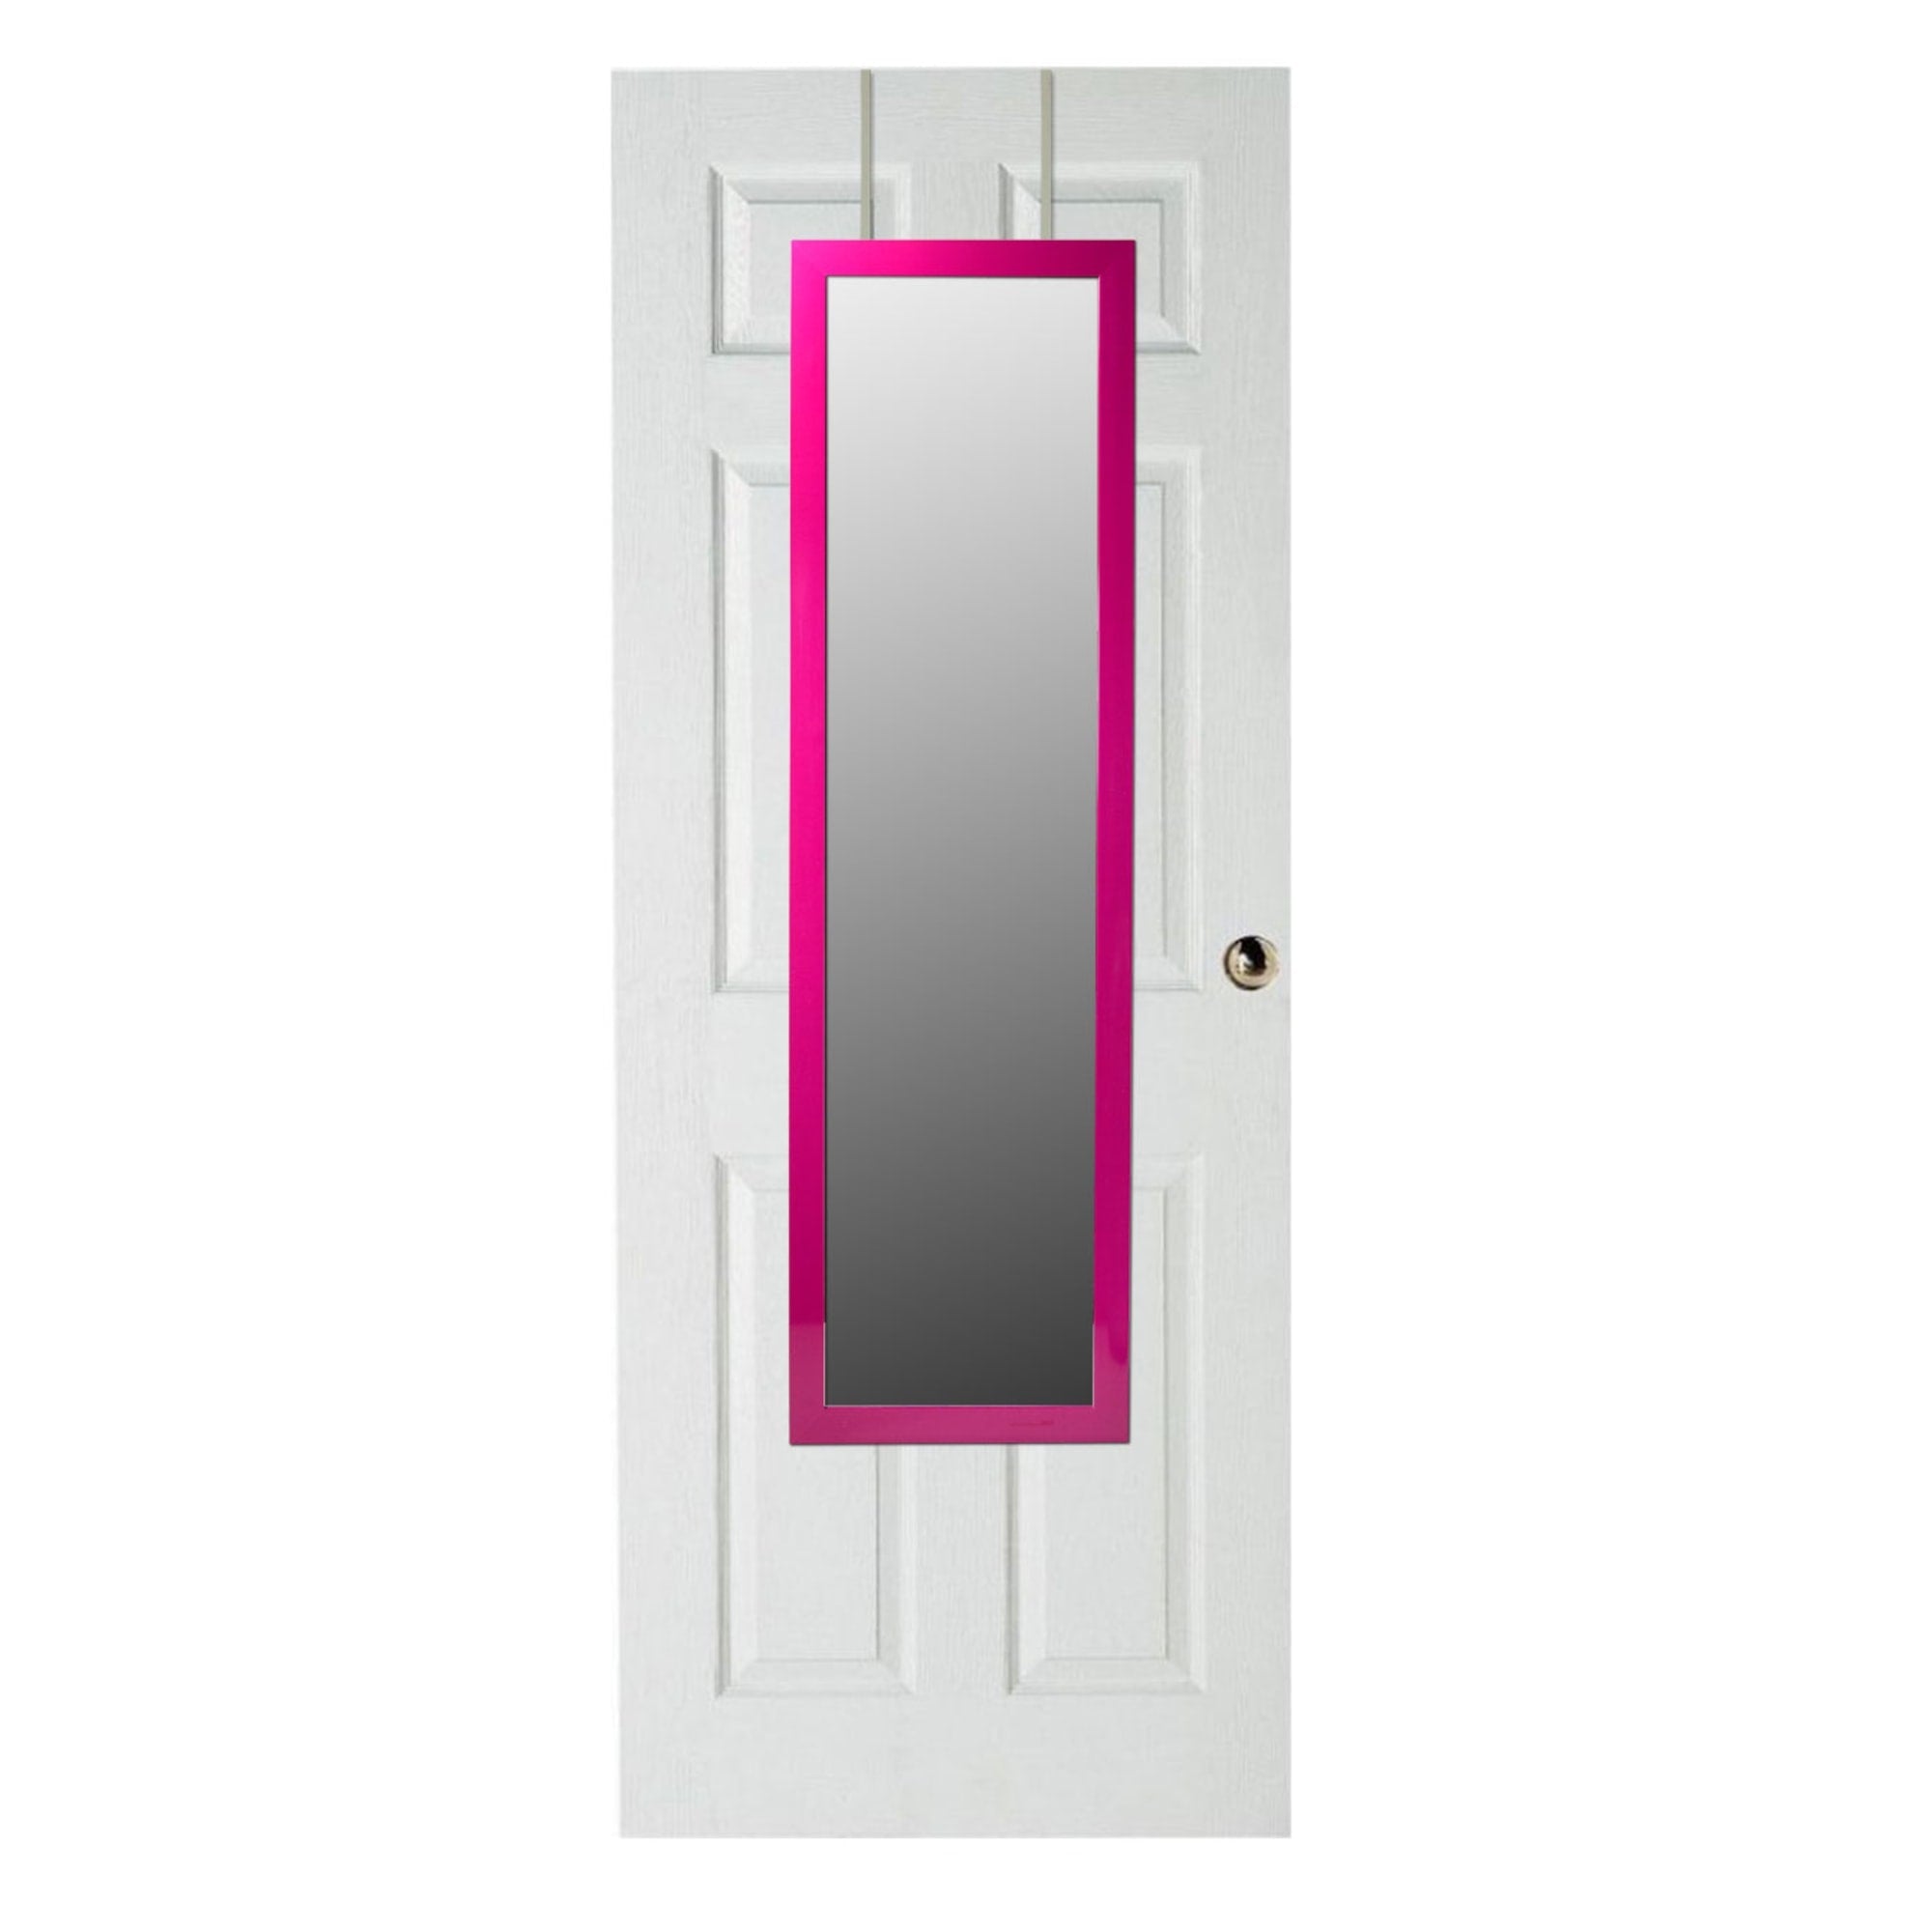 Home Basics Over The Door Mirror, Pink $12 EACH, CASE PACK OF 6